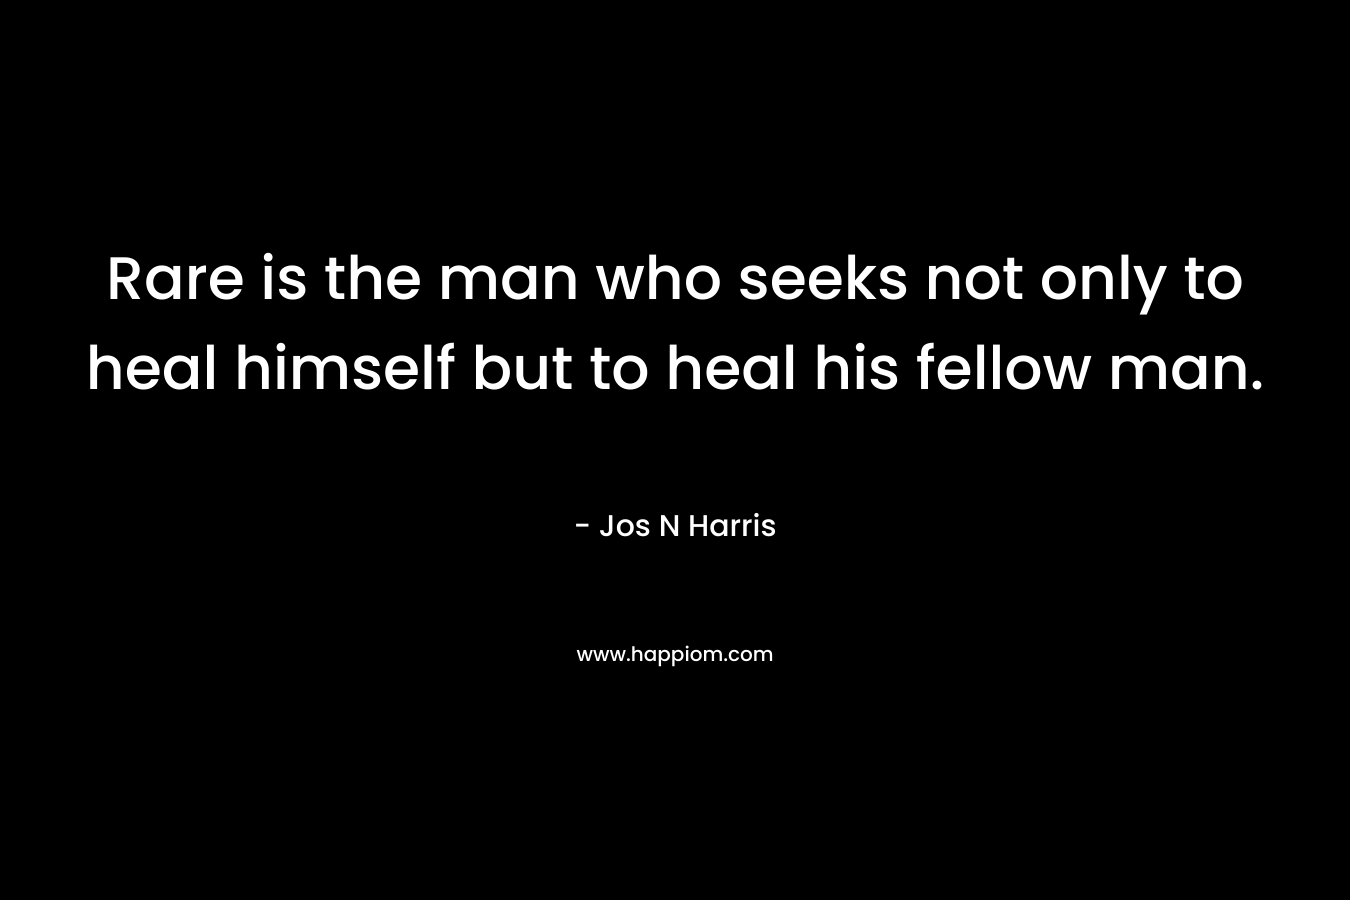 Rare is the man who seeks not only to heal himself but to heal his fellow man. – Jos N Harris